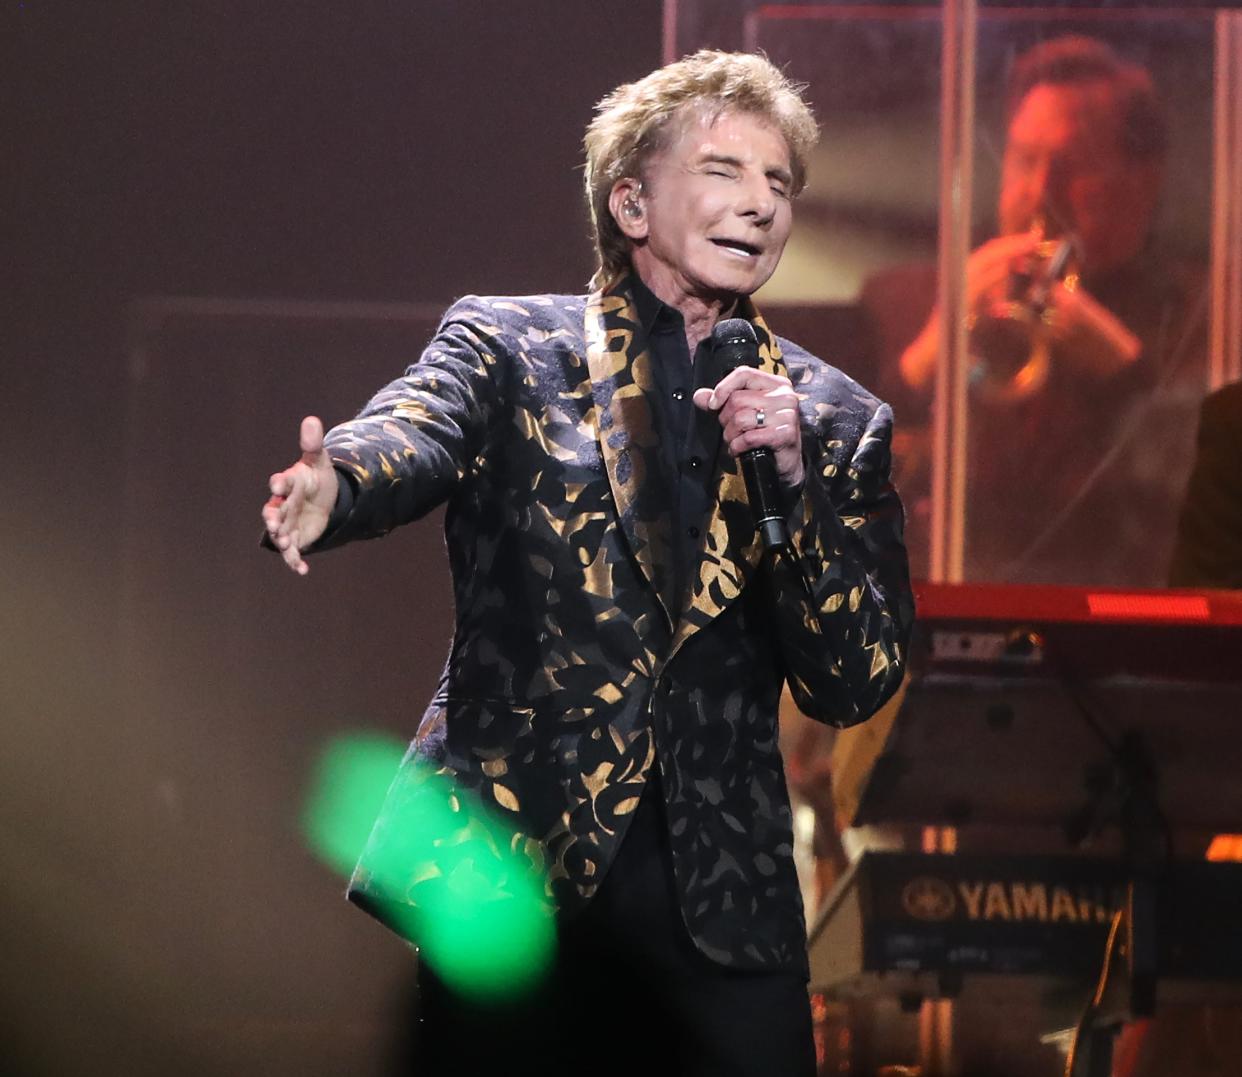 Barry Manilow will play a final Milwaukee concert on Aug. 3 at Fiserv Forum.